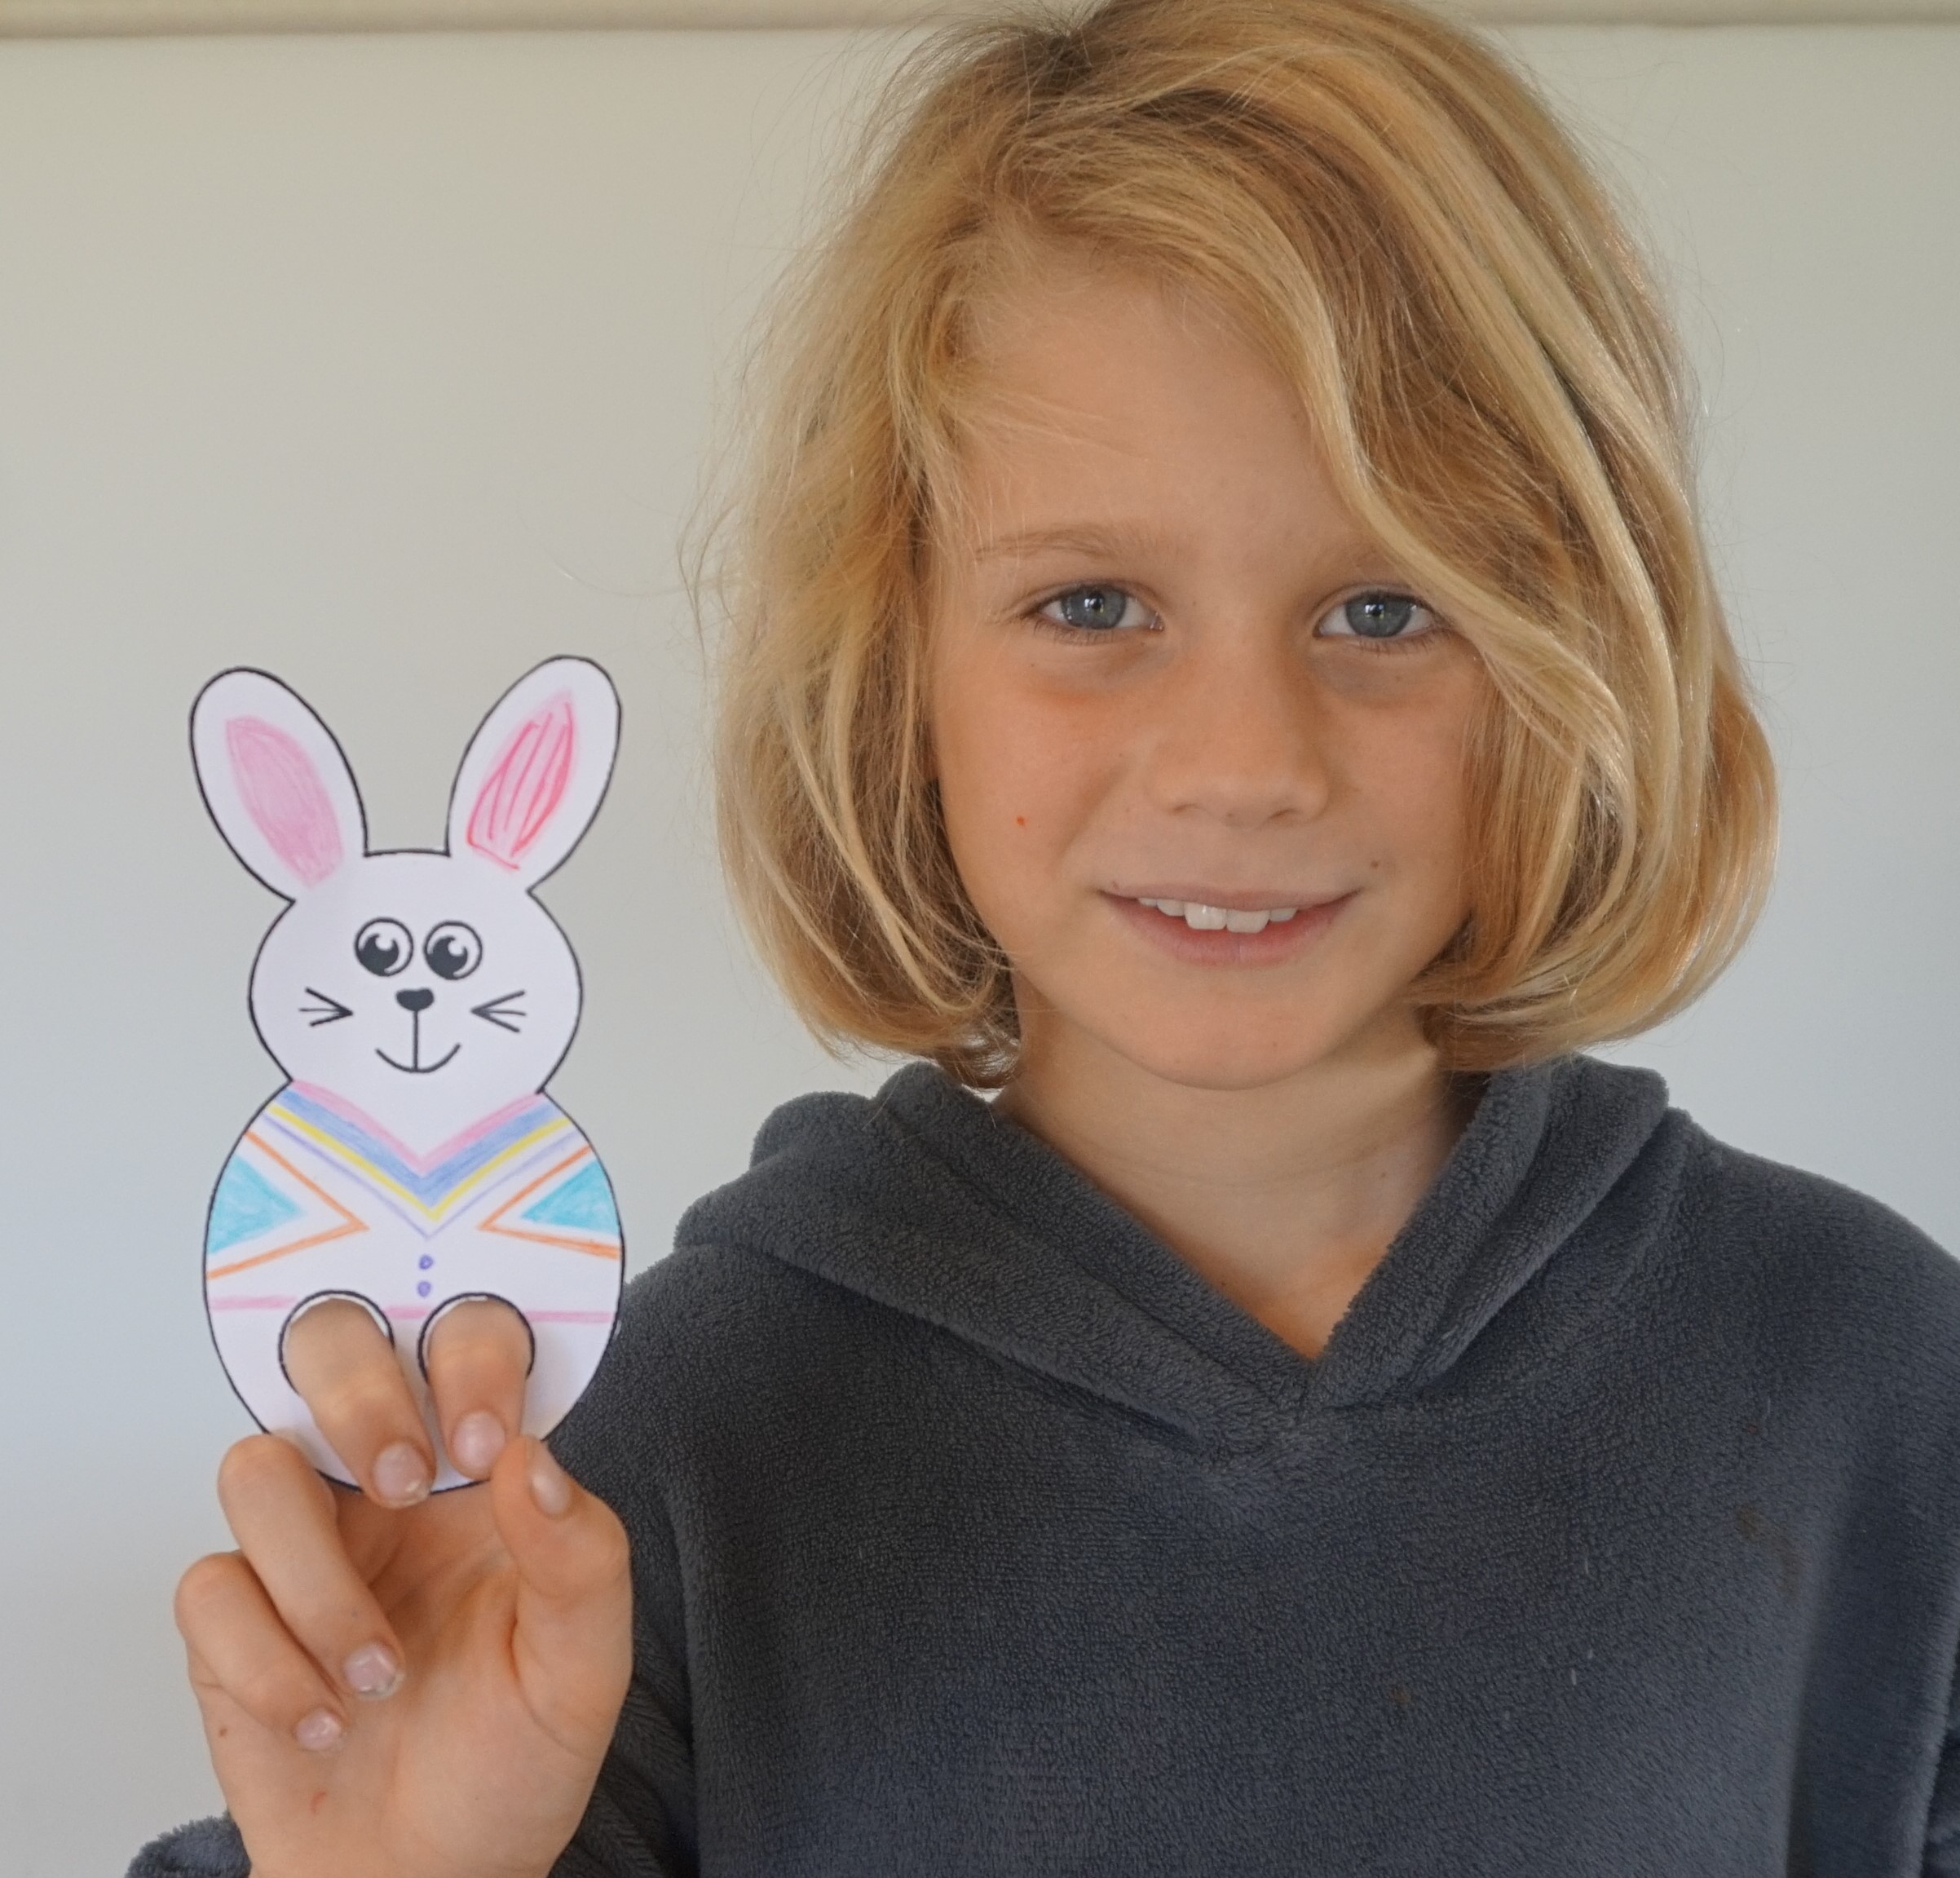 Boy demonstrating finished bunny puppet.